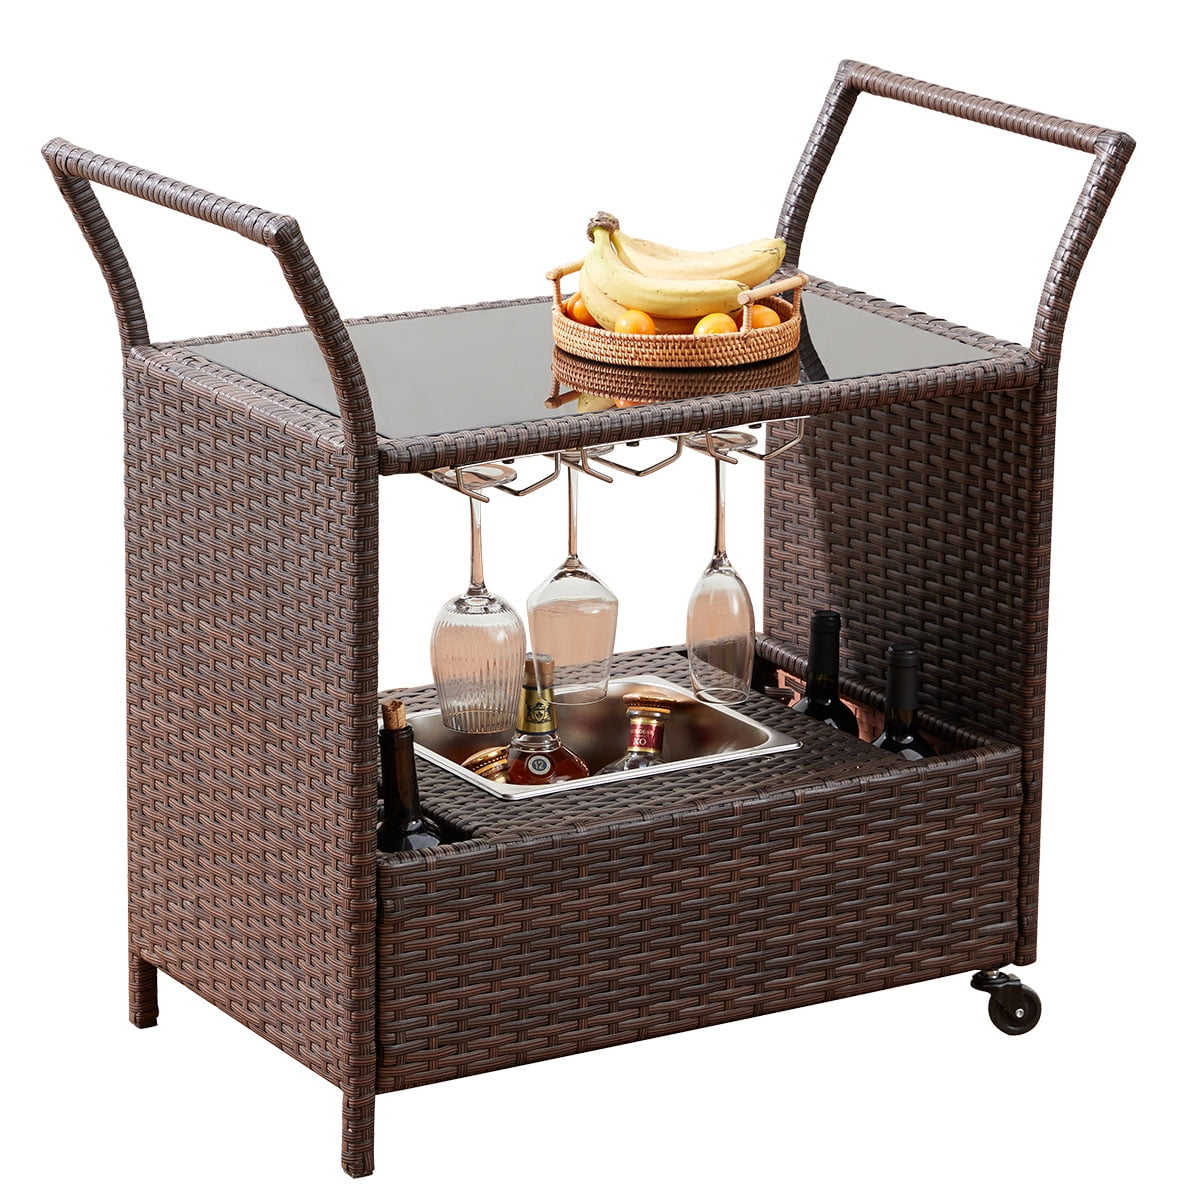 Erommy Outdoor Wicker Bar Cart,Rolling Patio Wine Cart  with Ice Bucket,Glass Countertop, Wine Glass Holders,Rattan Bar Serving Cart for Pool, Party, Backyard